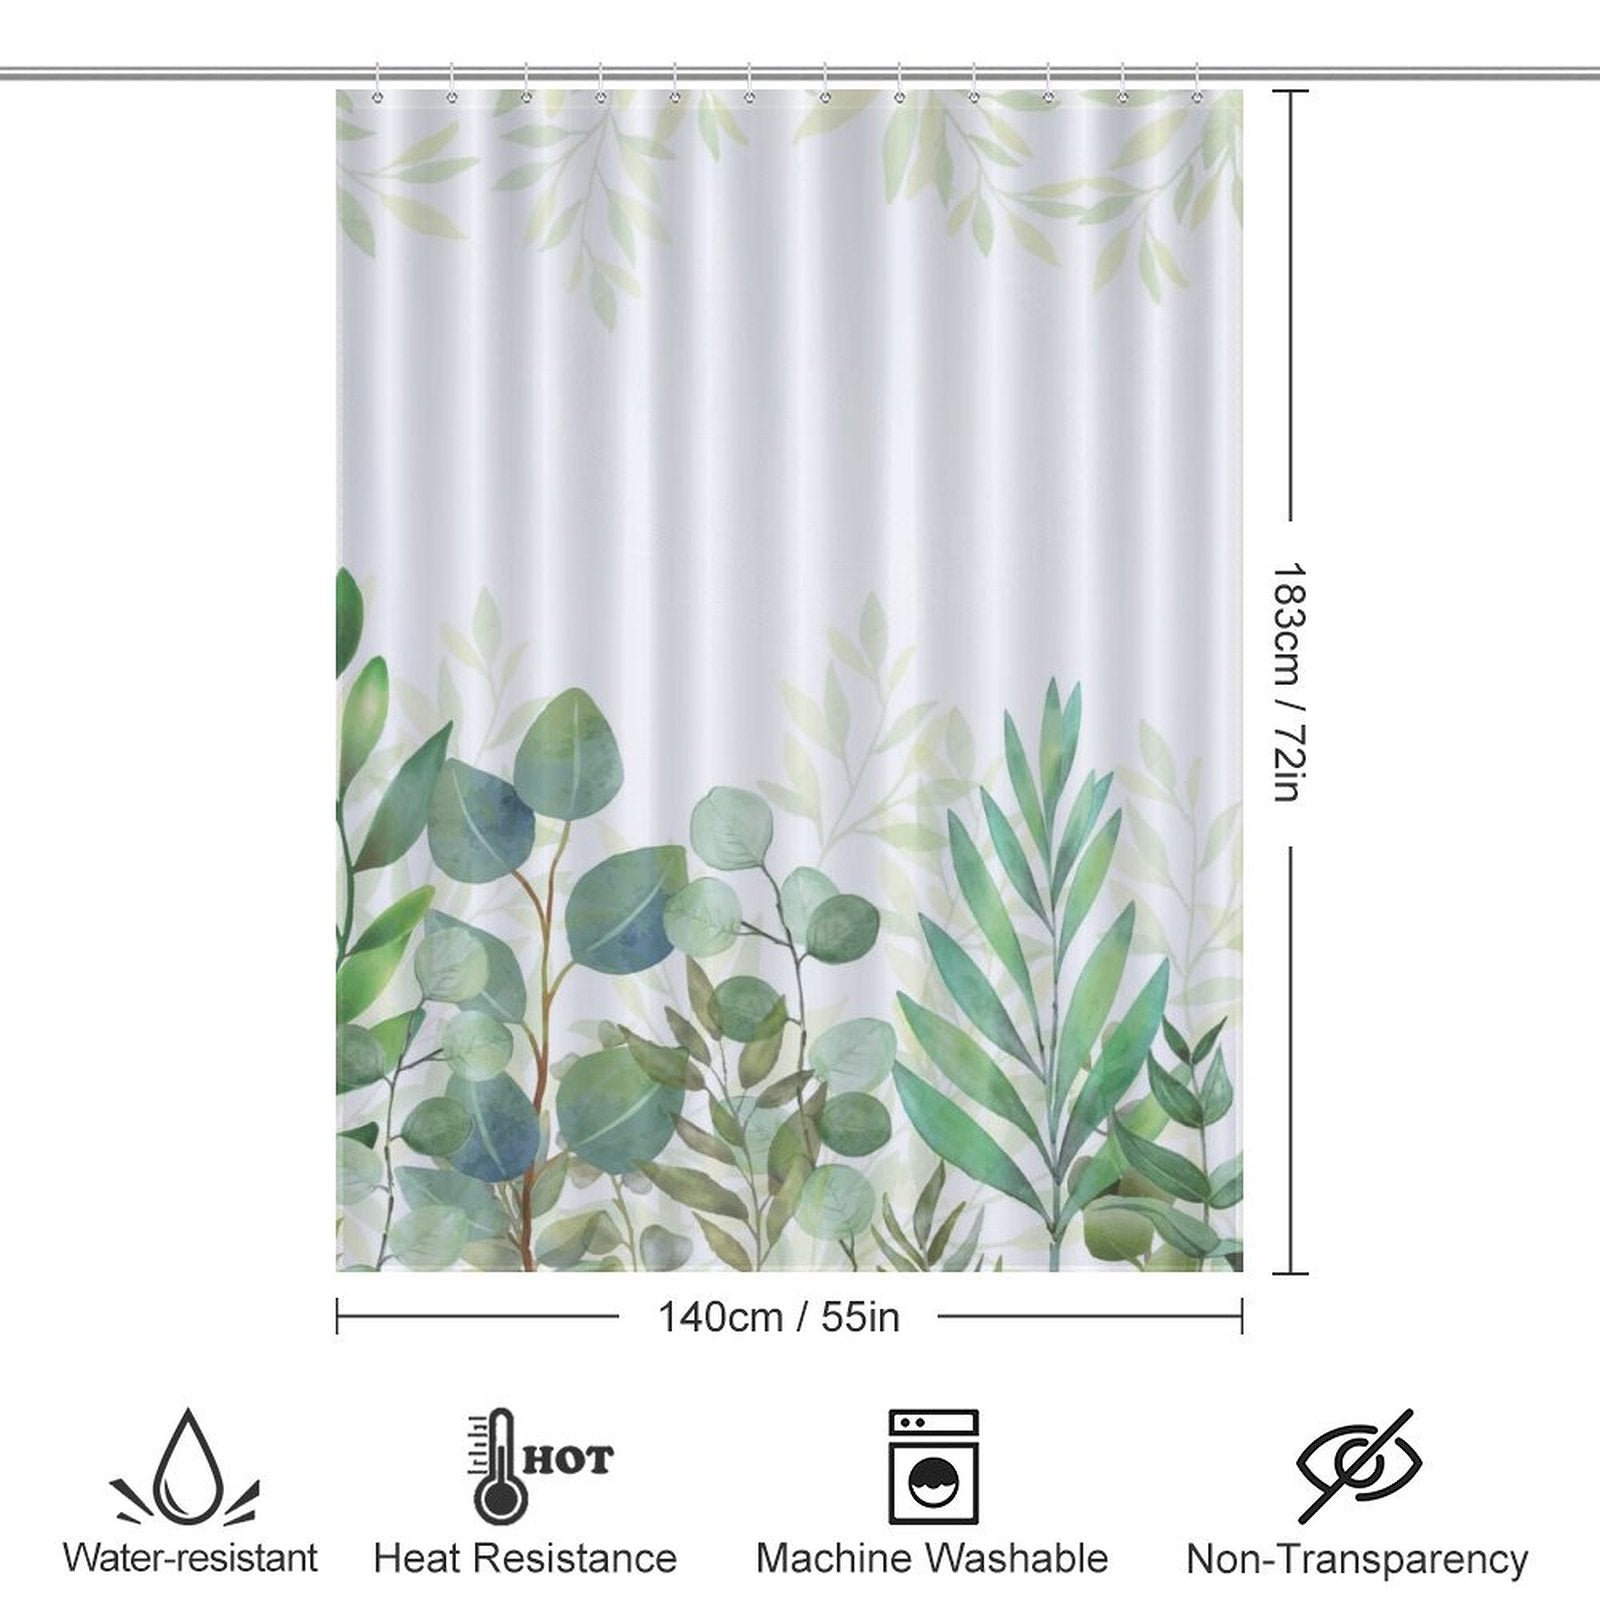 A Cotton Cat Natural Modern Ombre Sage Green White Leaf Shower Curtain-Cottoncat with sage green and white leaf patterns, measuring 183cm by 140cm. Made of polyester fabric, it features water resistance, heat resistance, machine washability, and non-transparency.